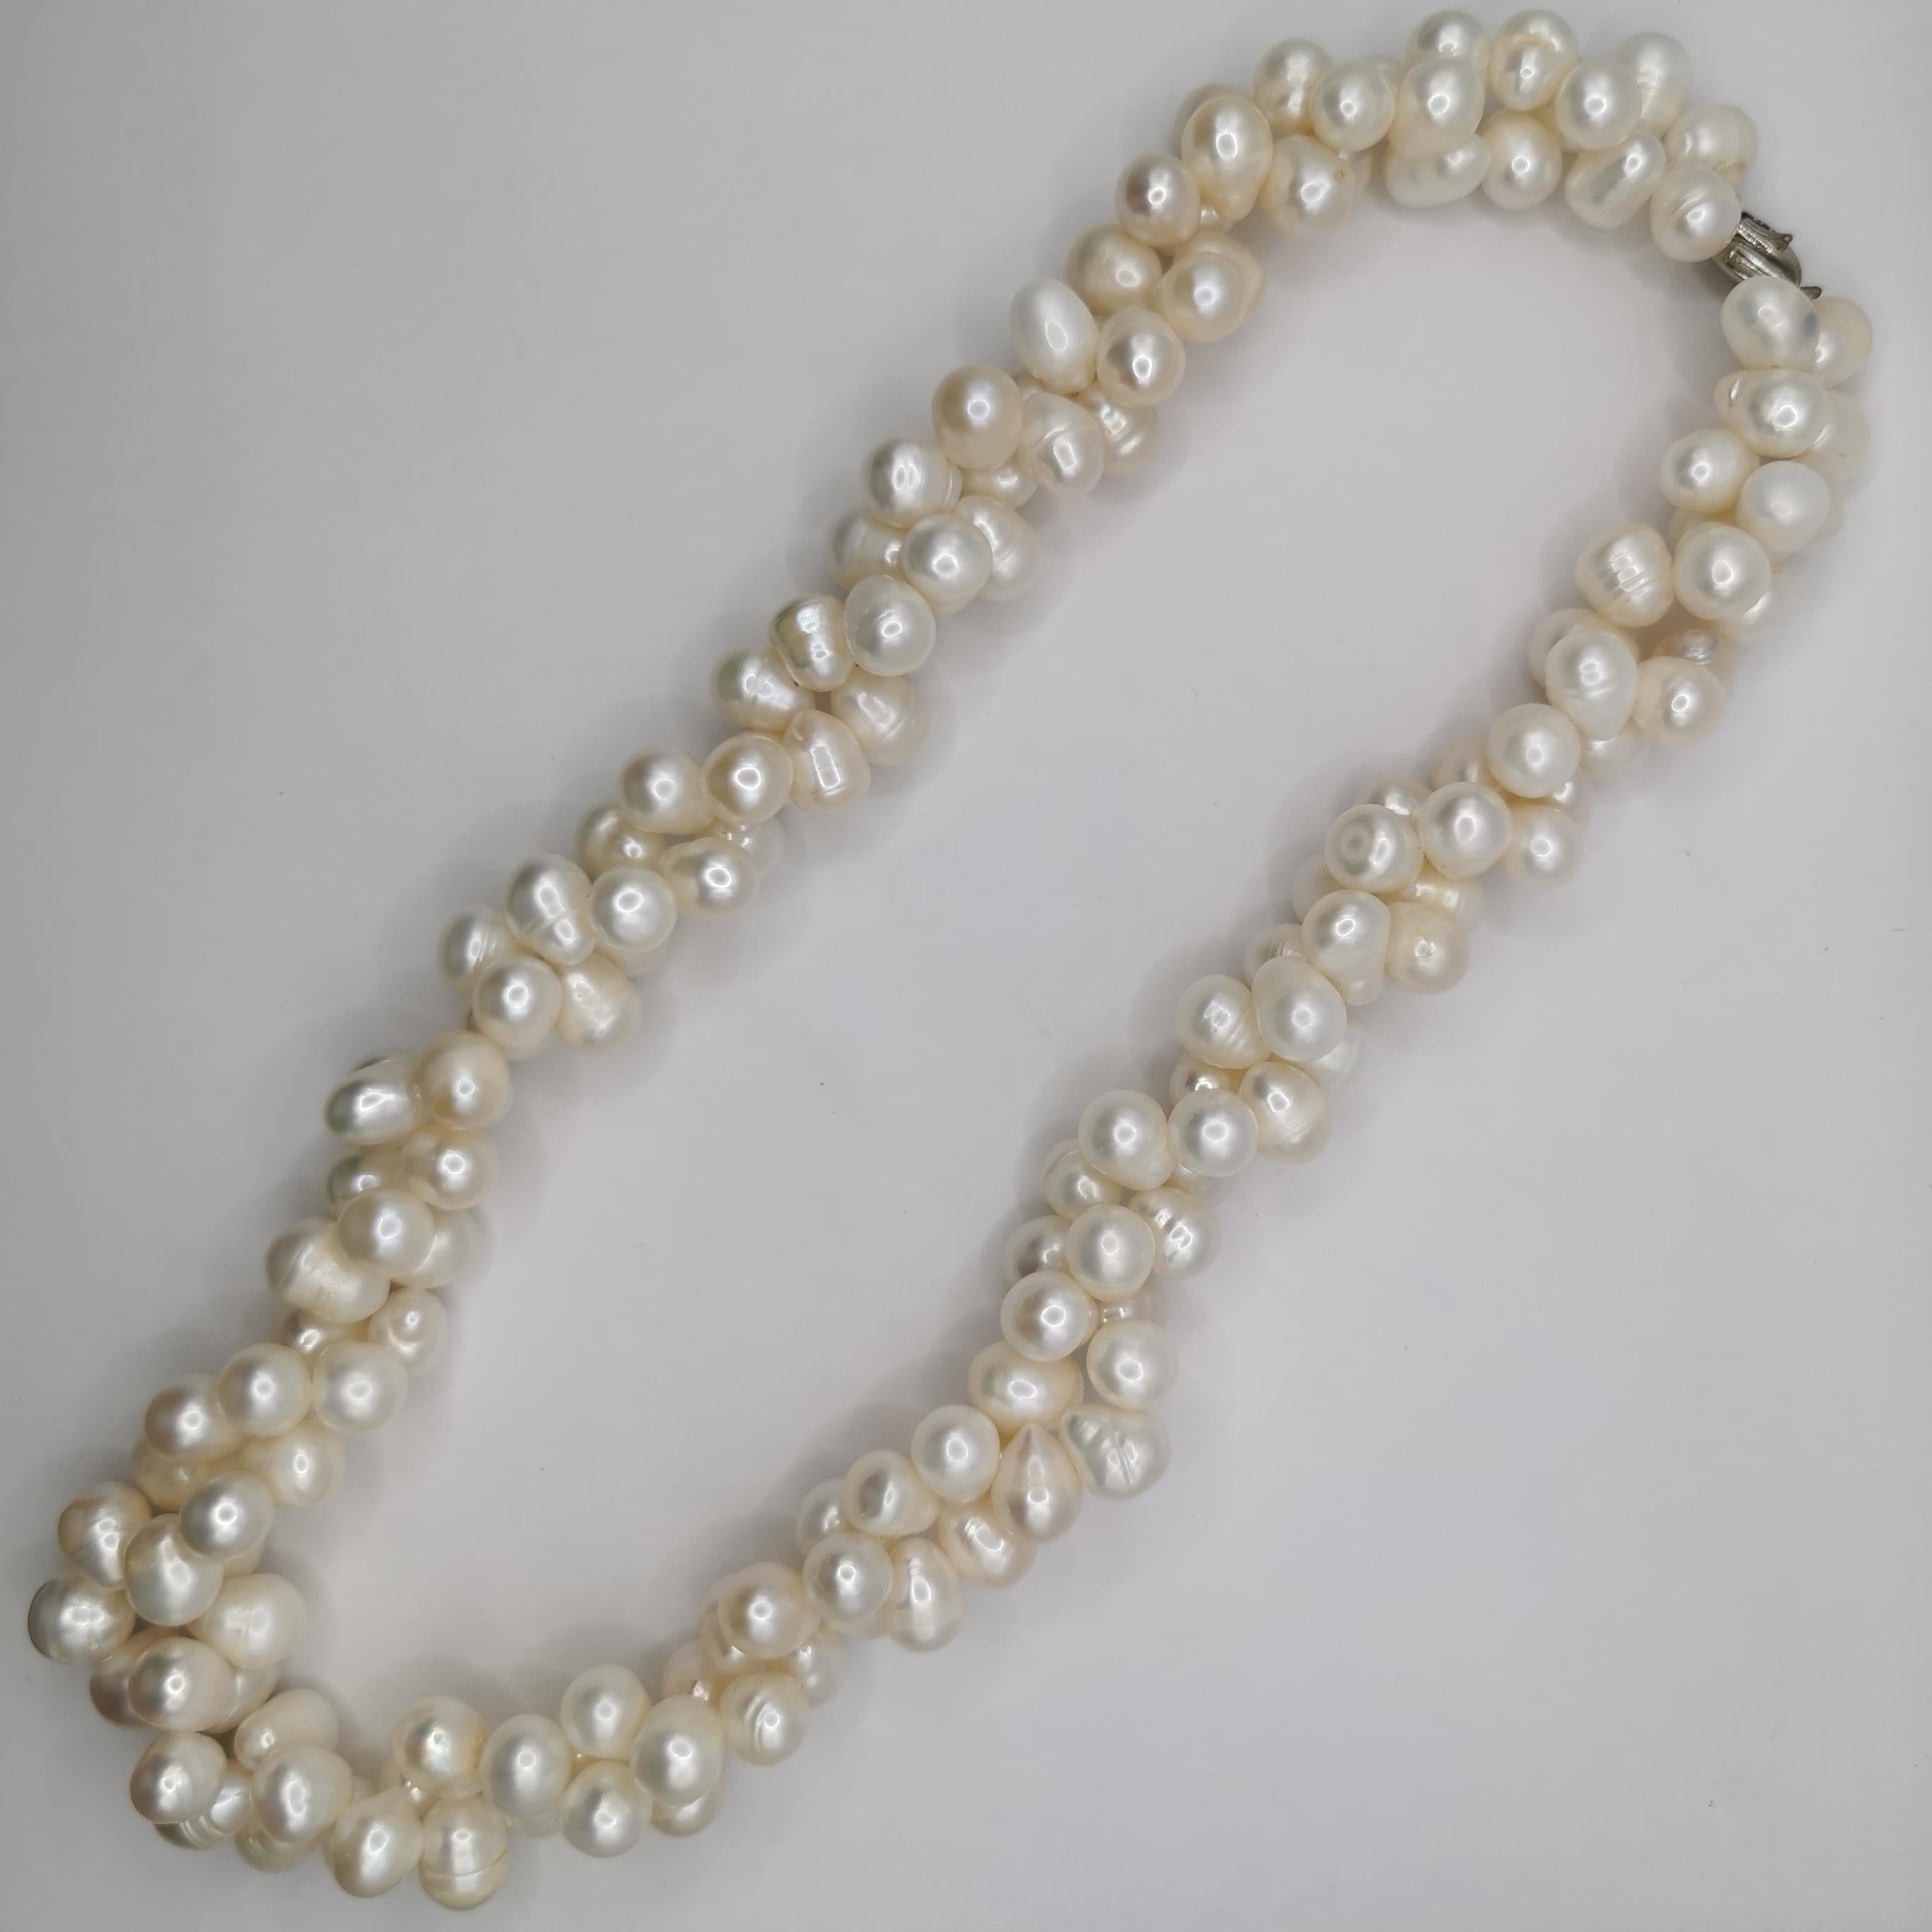 This dual twisted freshwater cultured baroque white pearl necklace is a beautiful and elegant piece that is sure to impress. The necklace features a unique design, with two twisted strands of freshwater cultured baroque white pearls that come